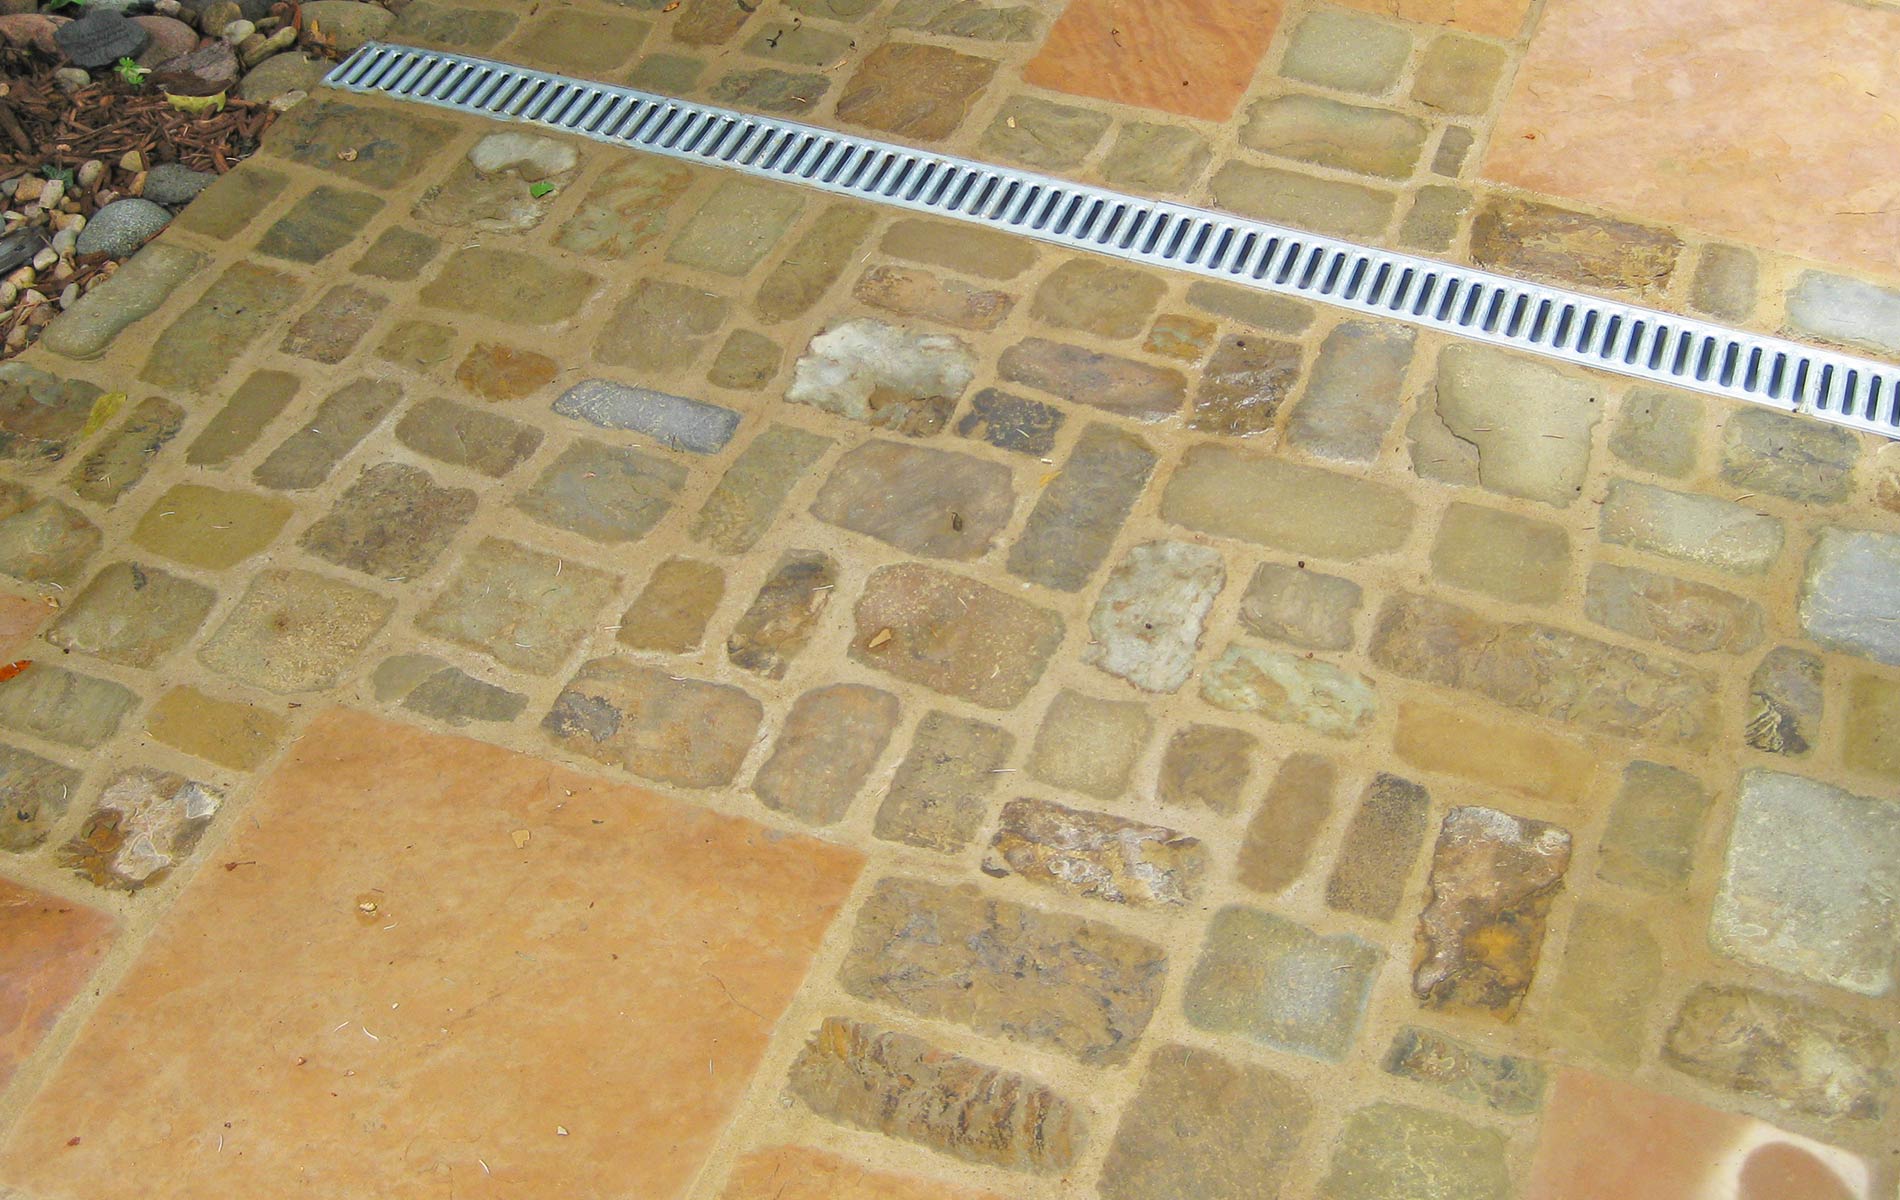 A unique variation in patio material accents surface drain